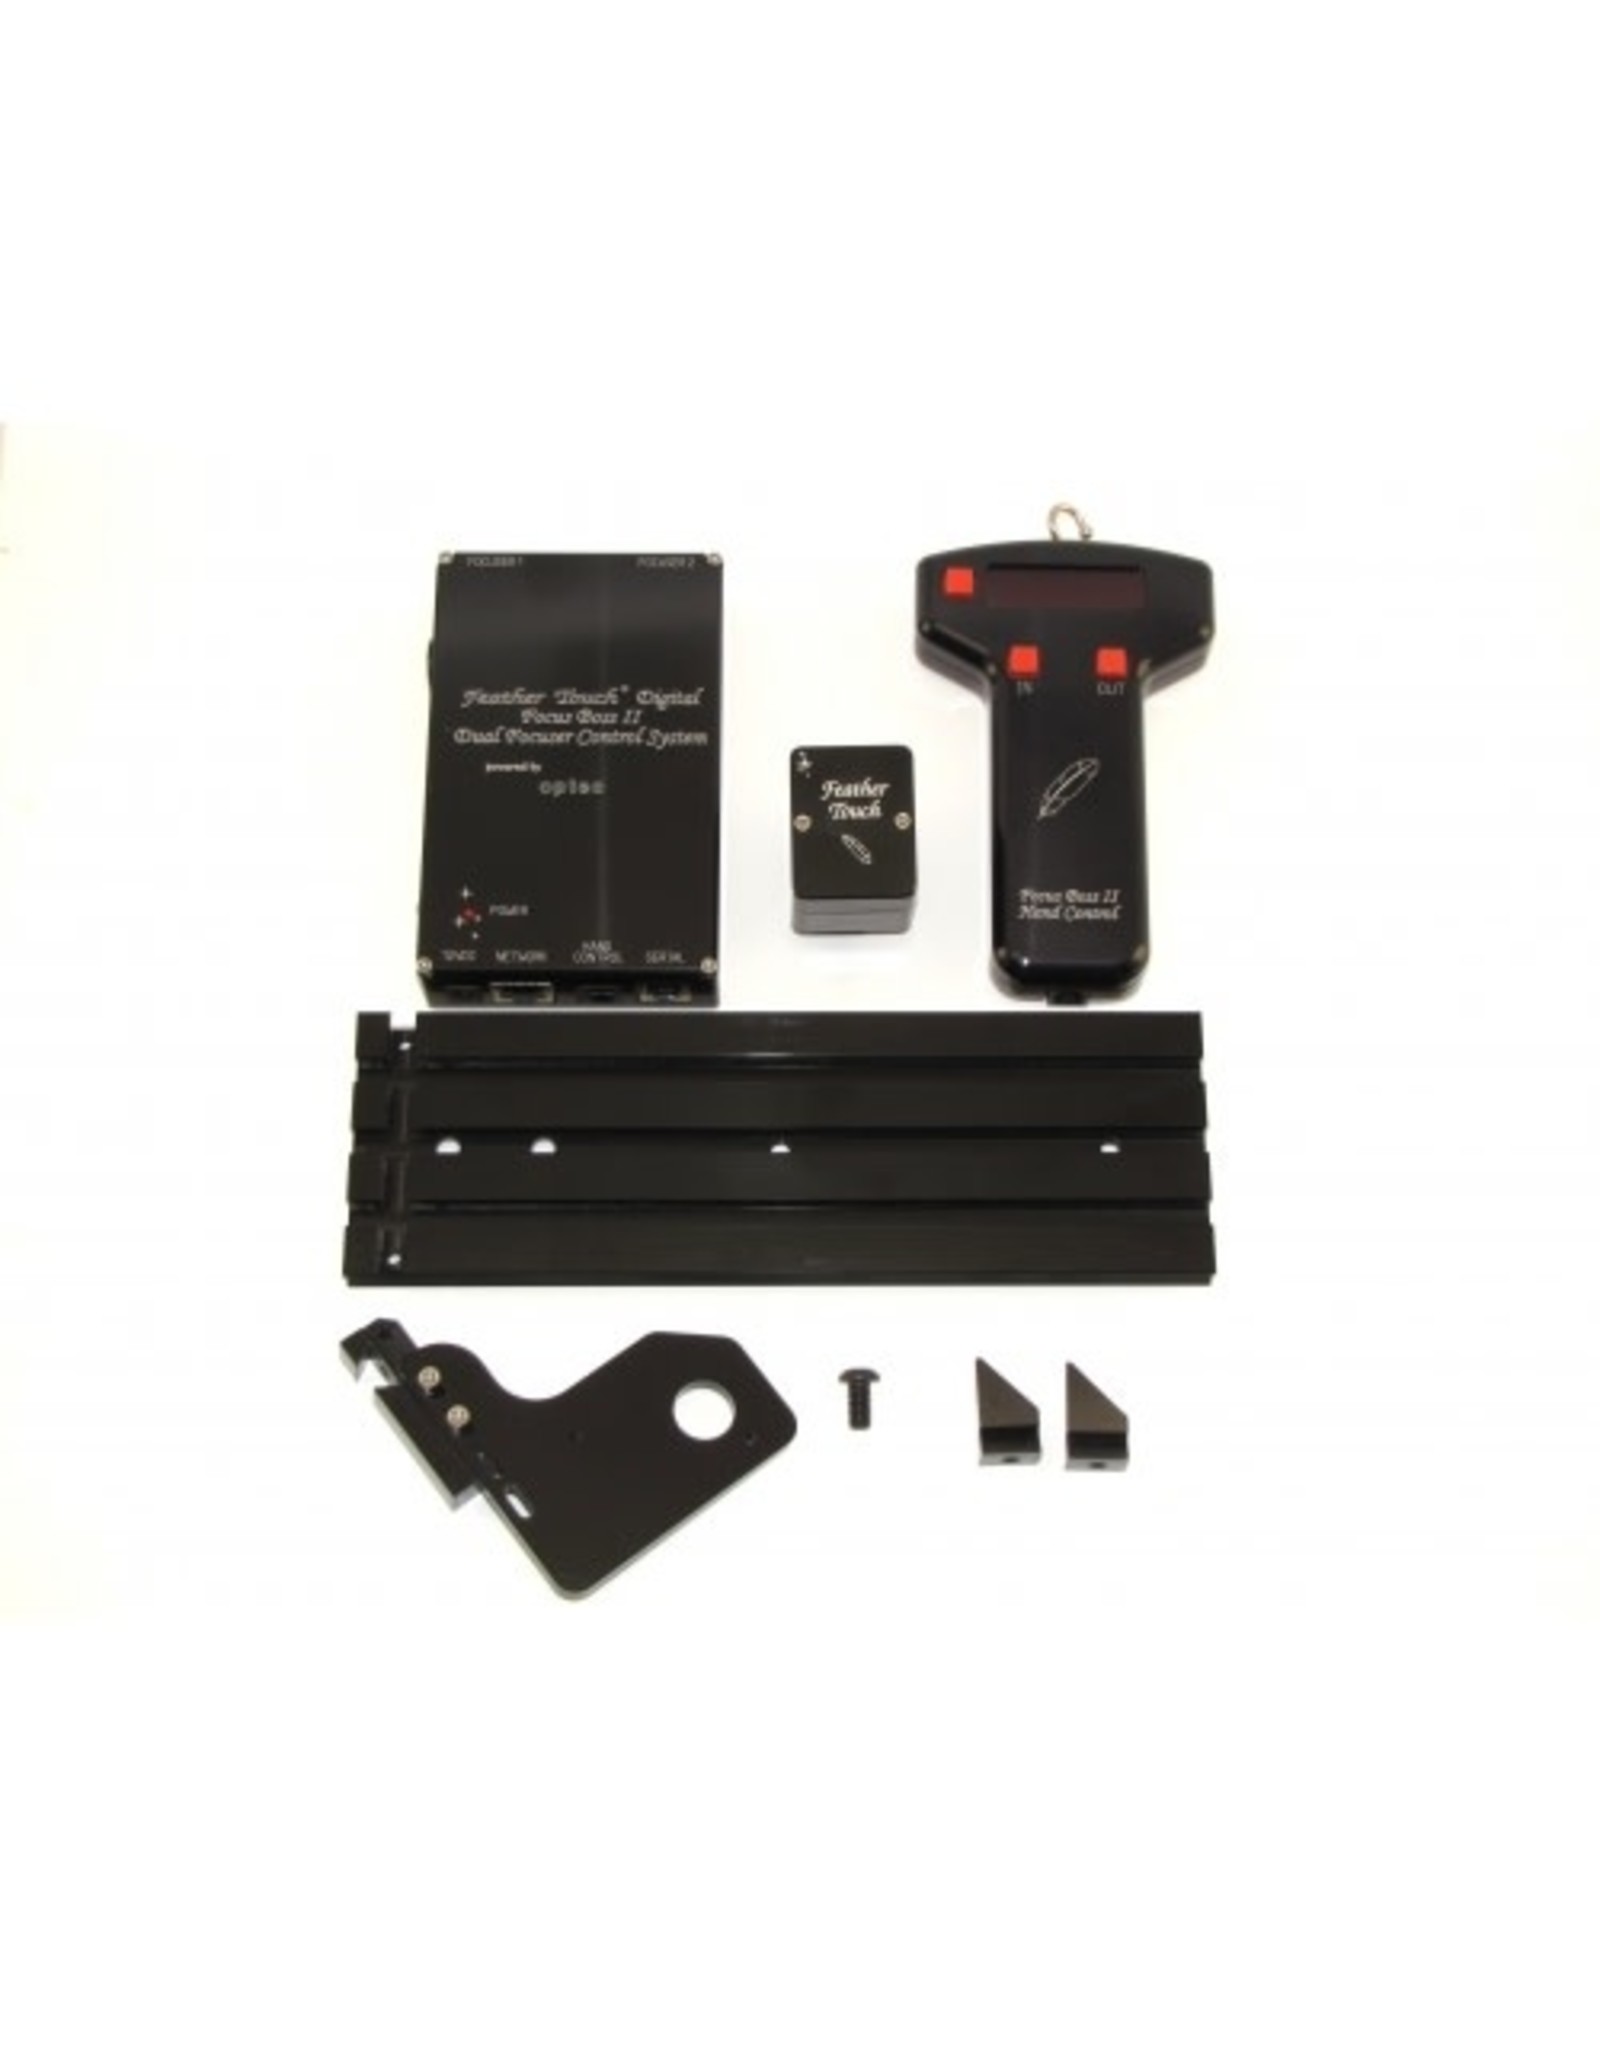 Feathertouch Feathertouch SI-DOVETAIL-FB-II---Universal Dovetail Camera Mount with Focuser Boss II Digital Kit